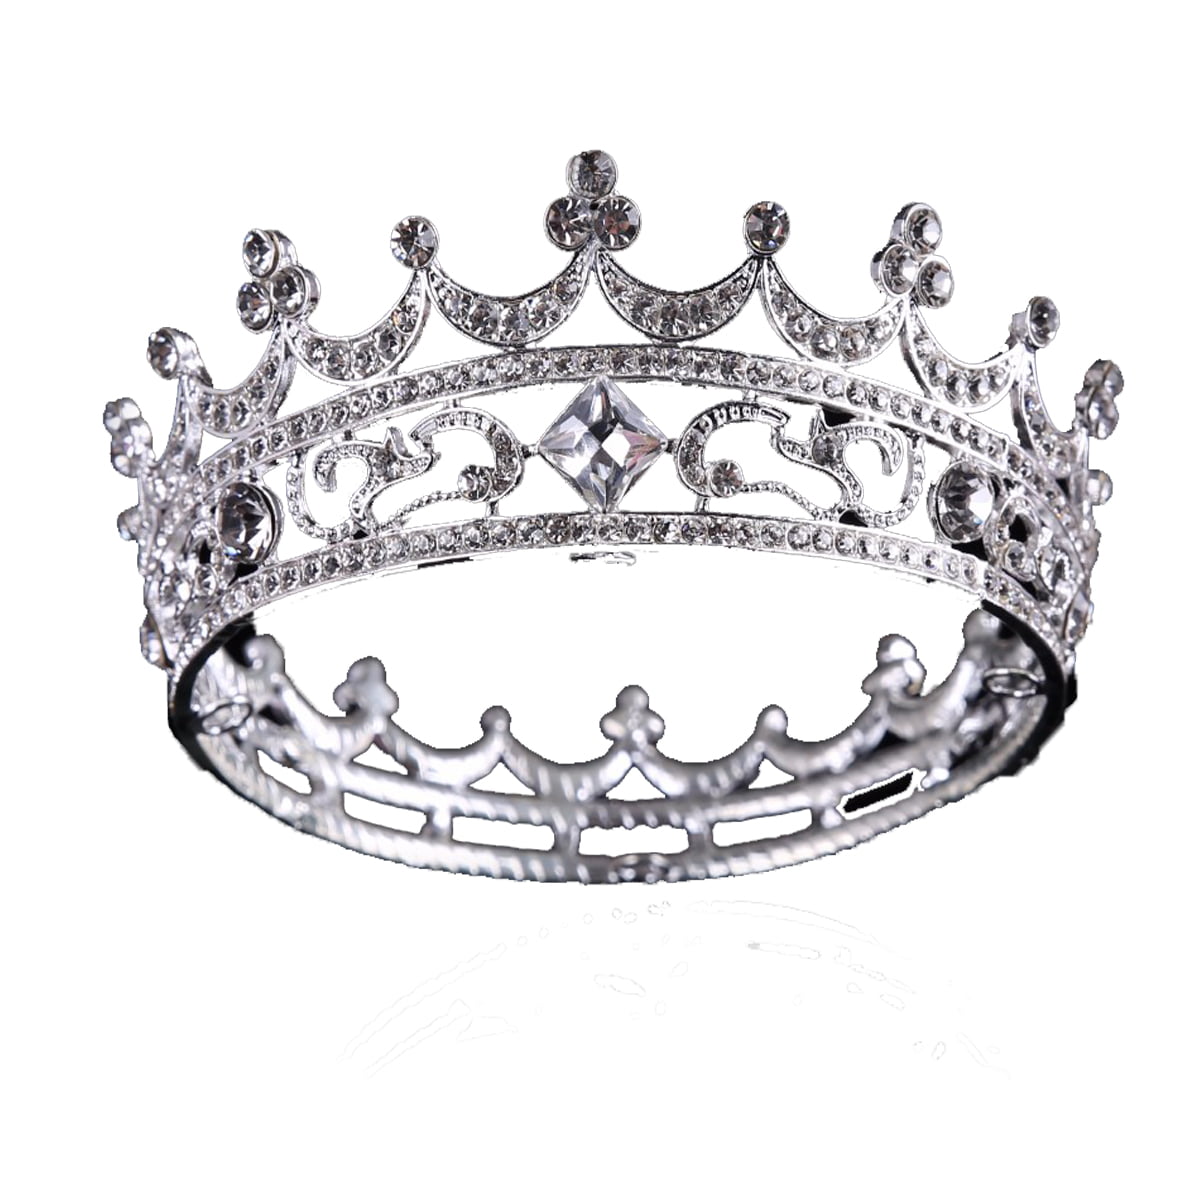 10cm High Large Full Crystal Wedding Bridal Party Pageant Prom Tiara Crown 